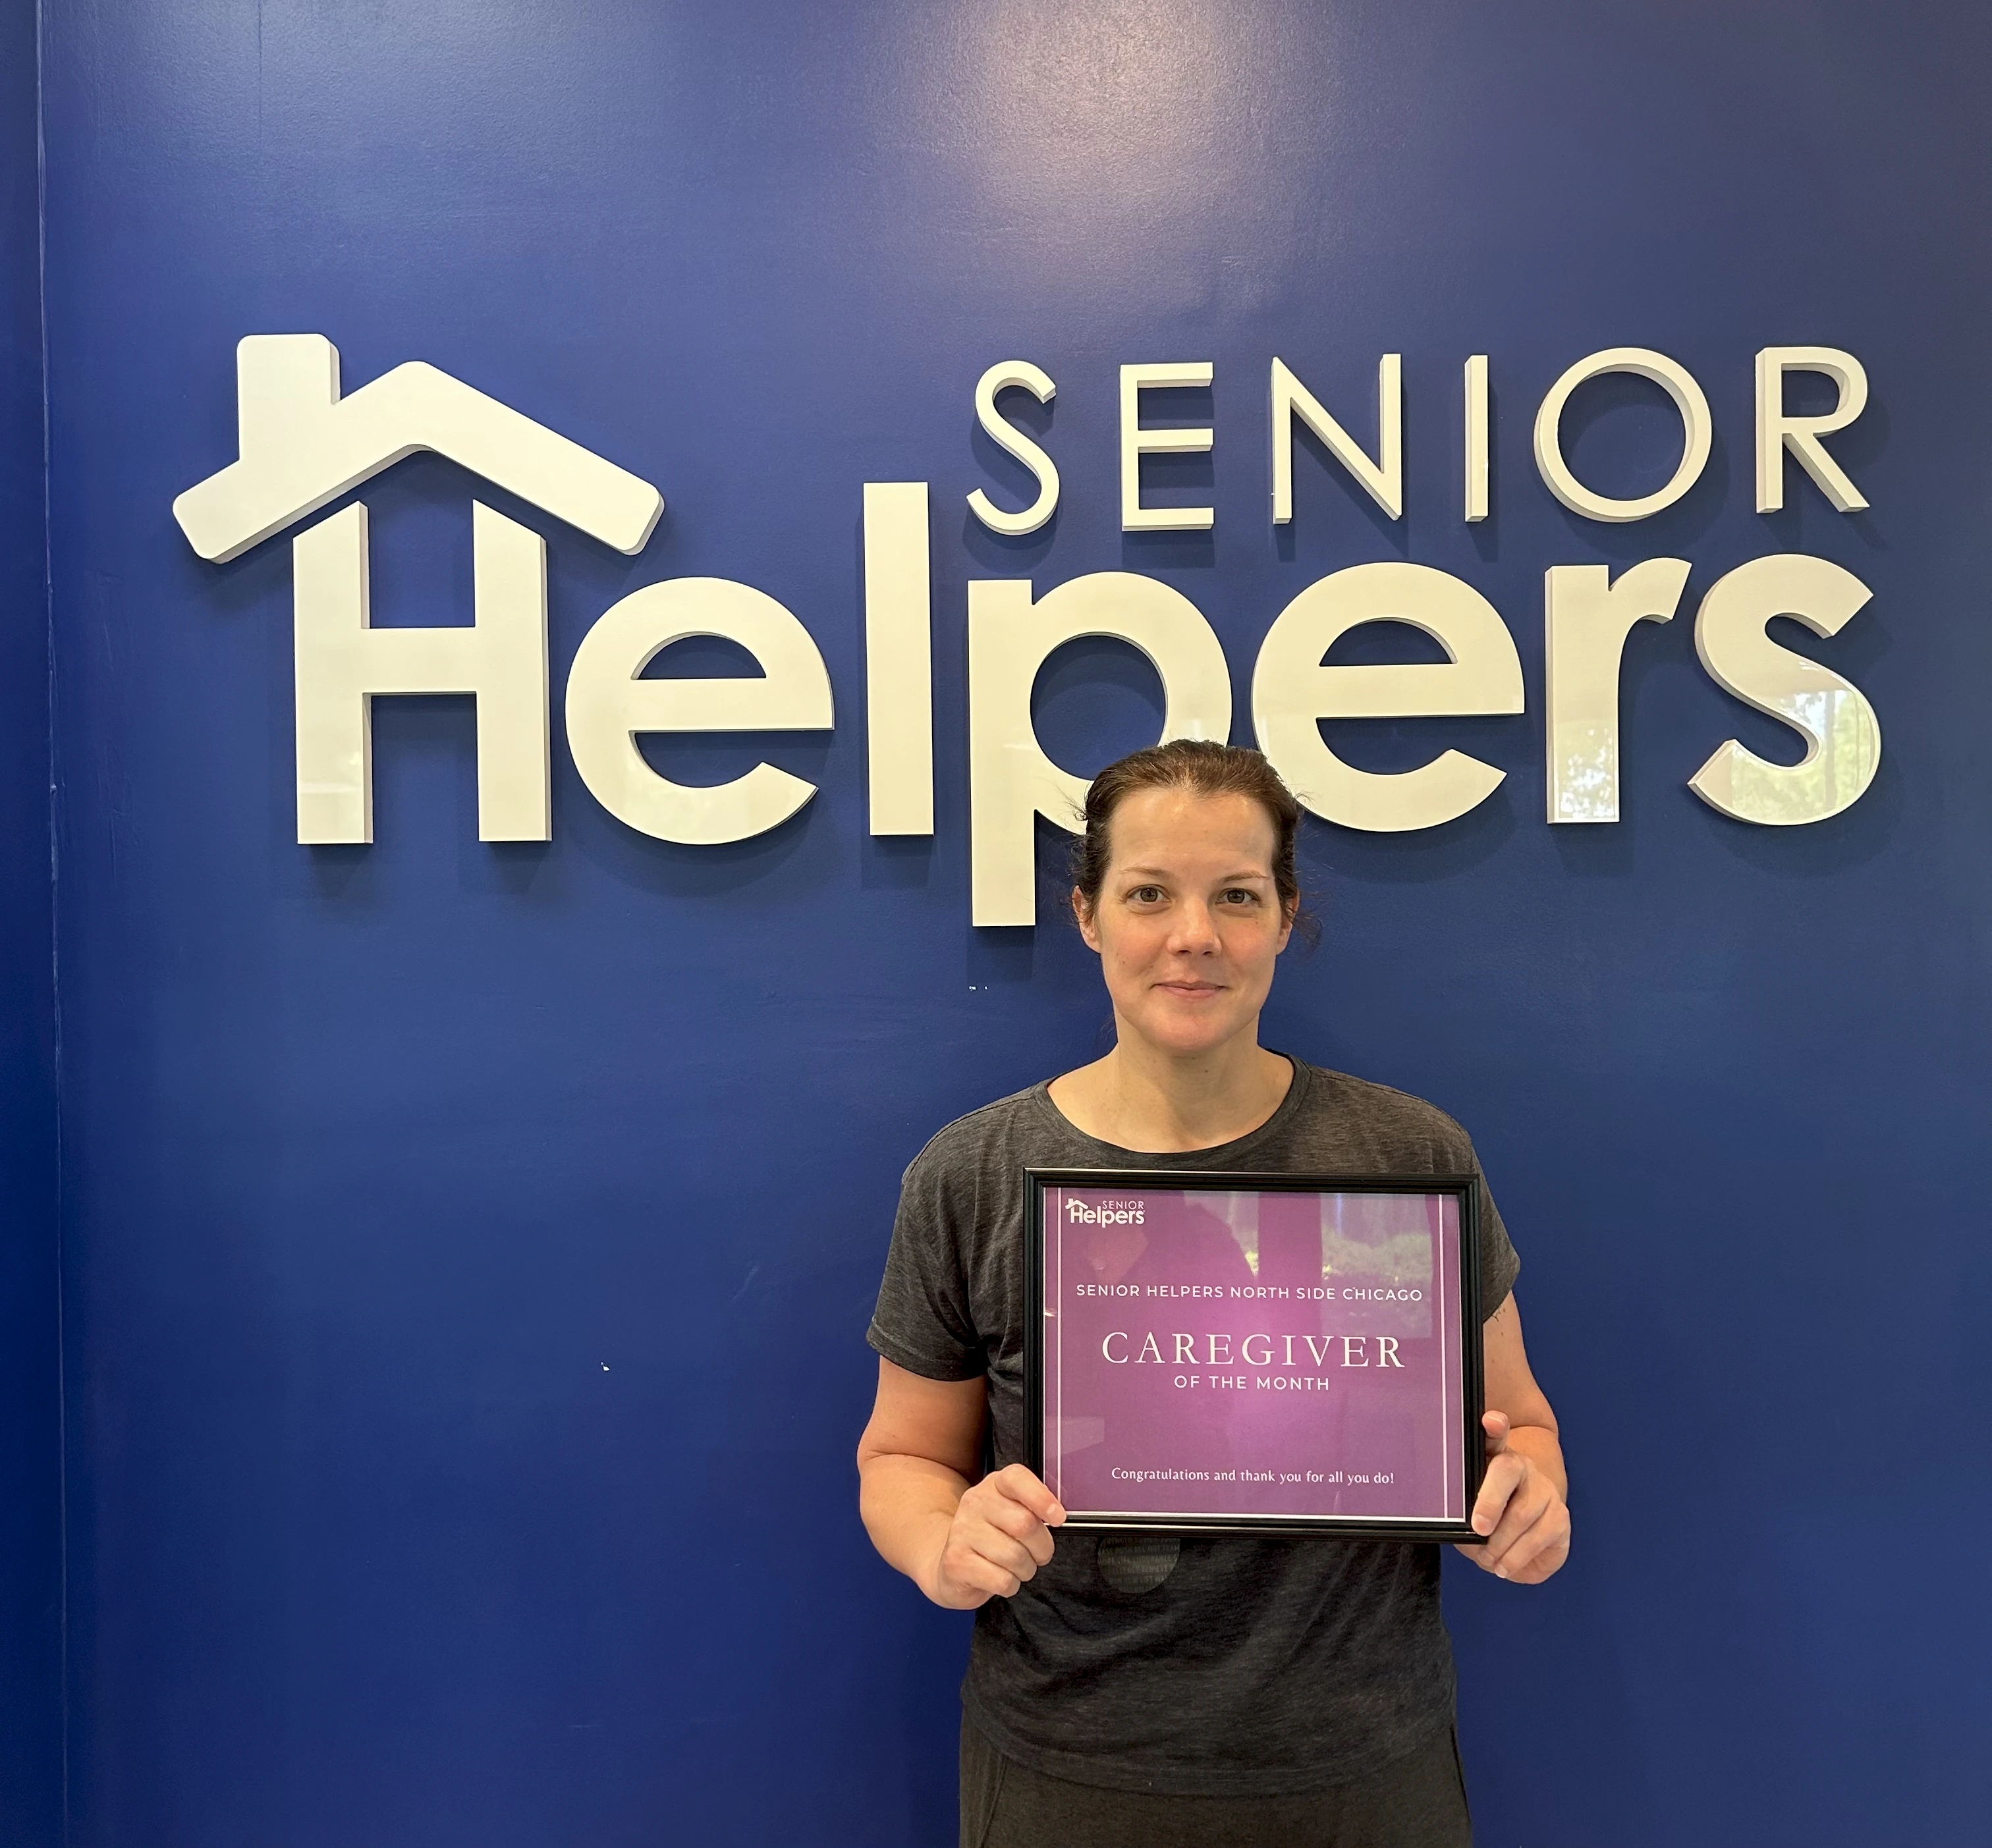 Congratulations to our April caregiver of the month, Kathryn! Kathryn came to us ready to learn and become an amazing caregiver. She shows true empathy and professionalism when working with all of her clients. Kathryn is always willing to go the extra mile- staying longer for her client, or adjusting her schedule to fit their needs. She is an asset to this agency and we are so grateful to have her on our North Side Chicago team.